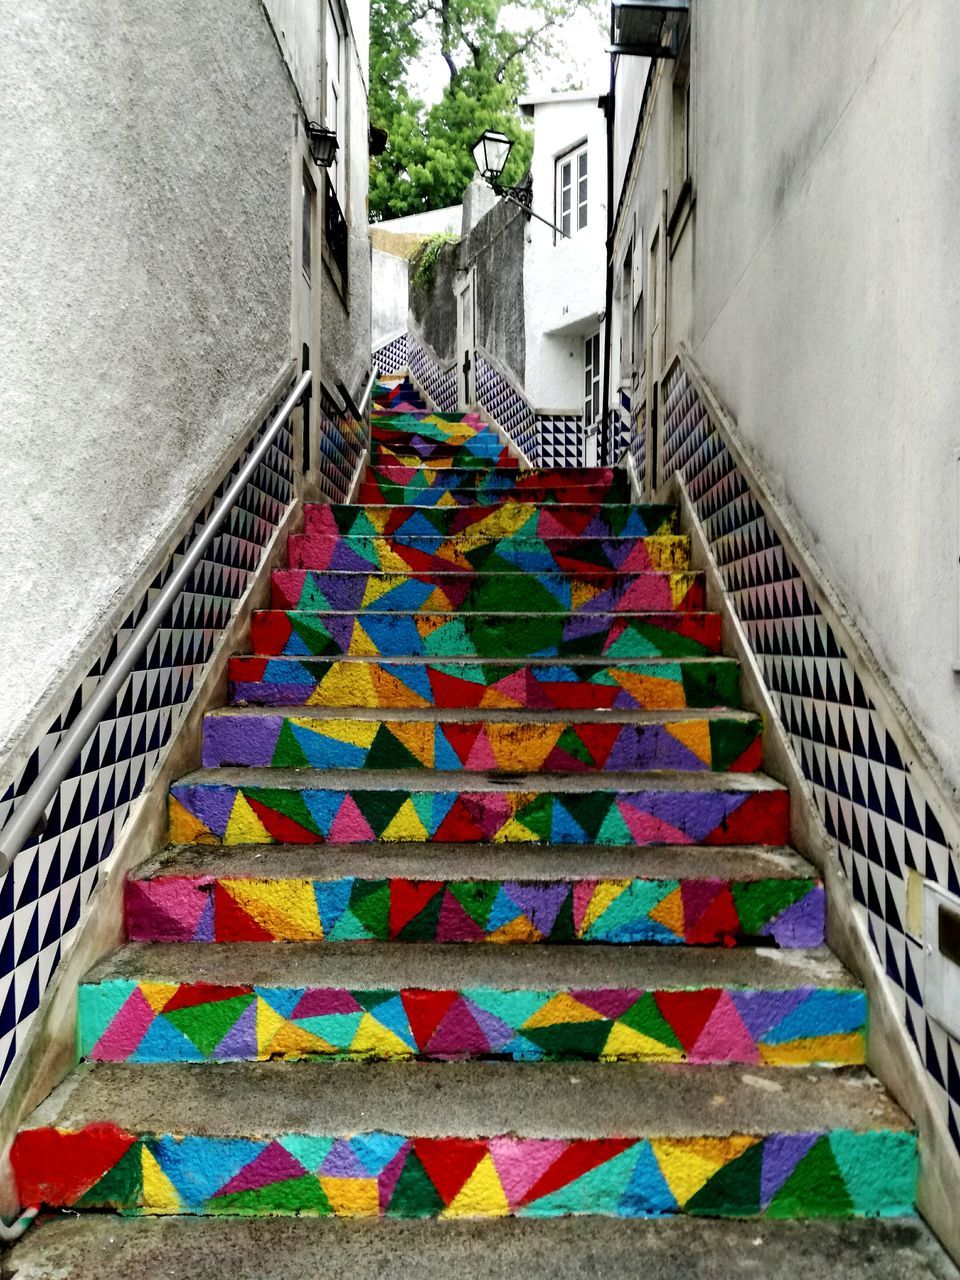 MULTI COLORED STEPS LEADING TOWARDS STAIRS